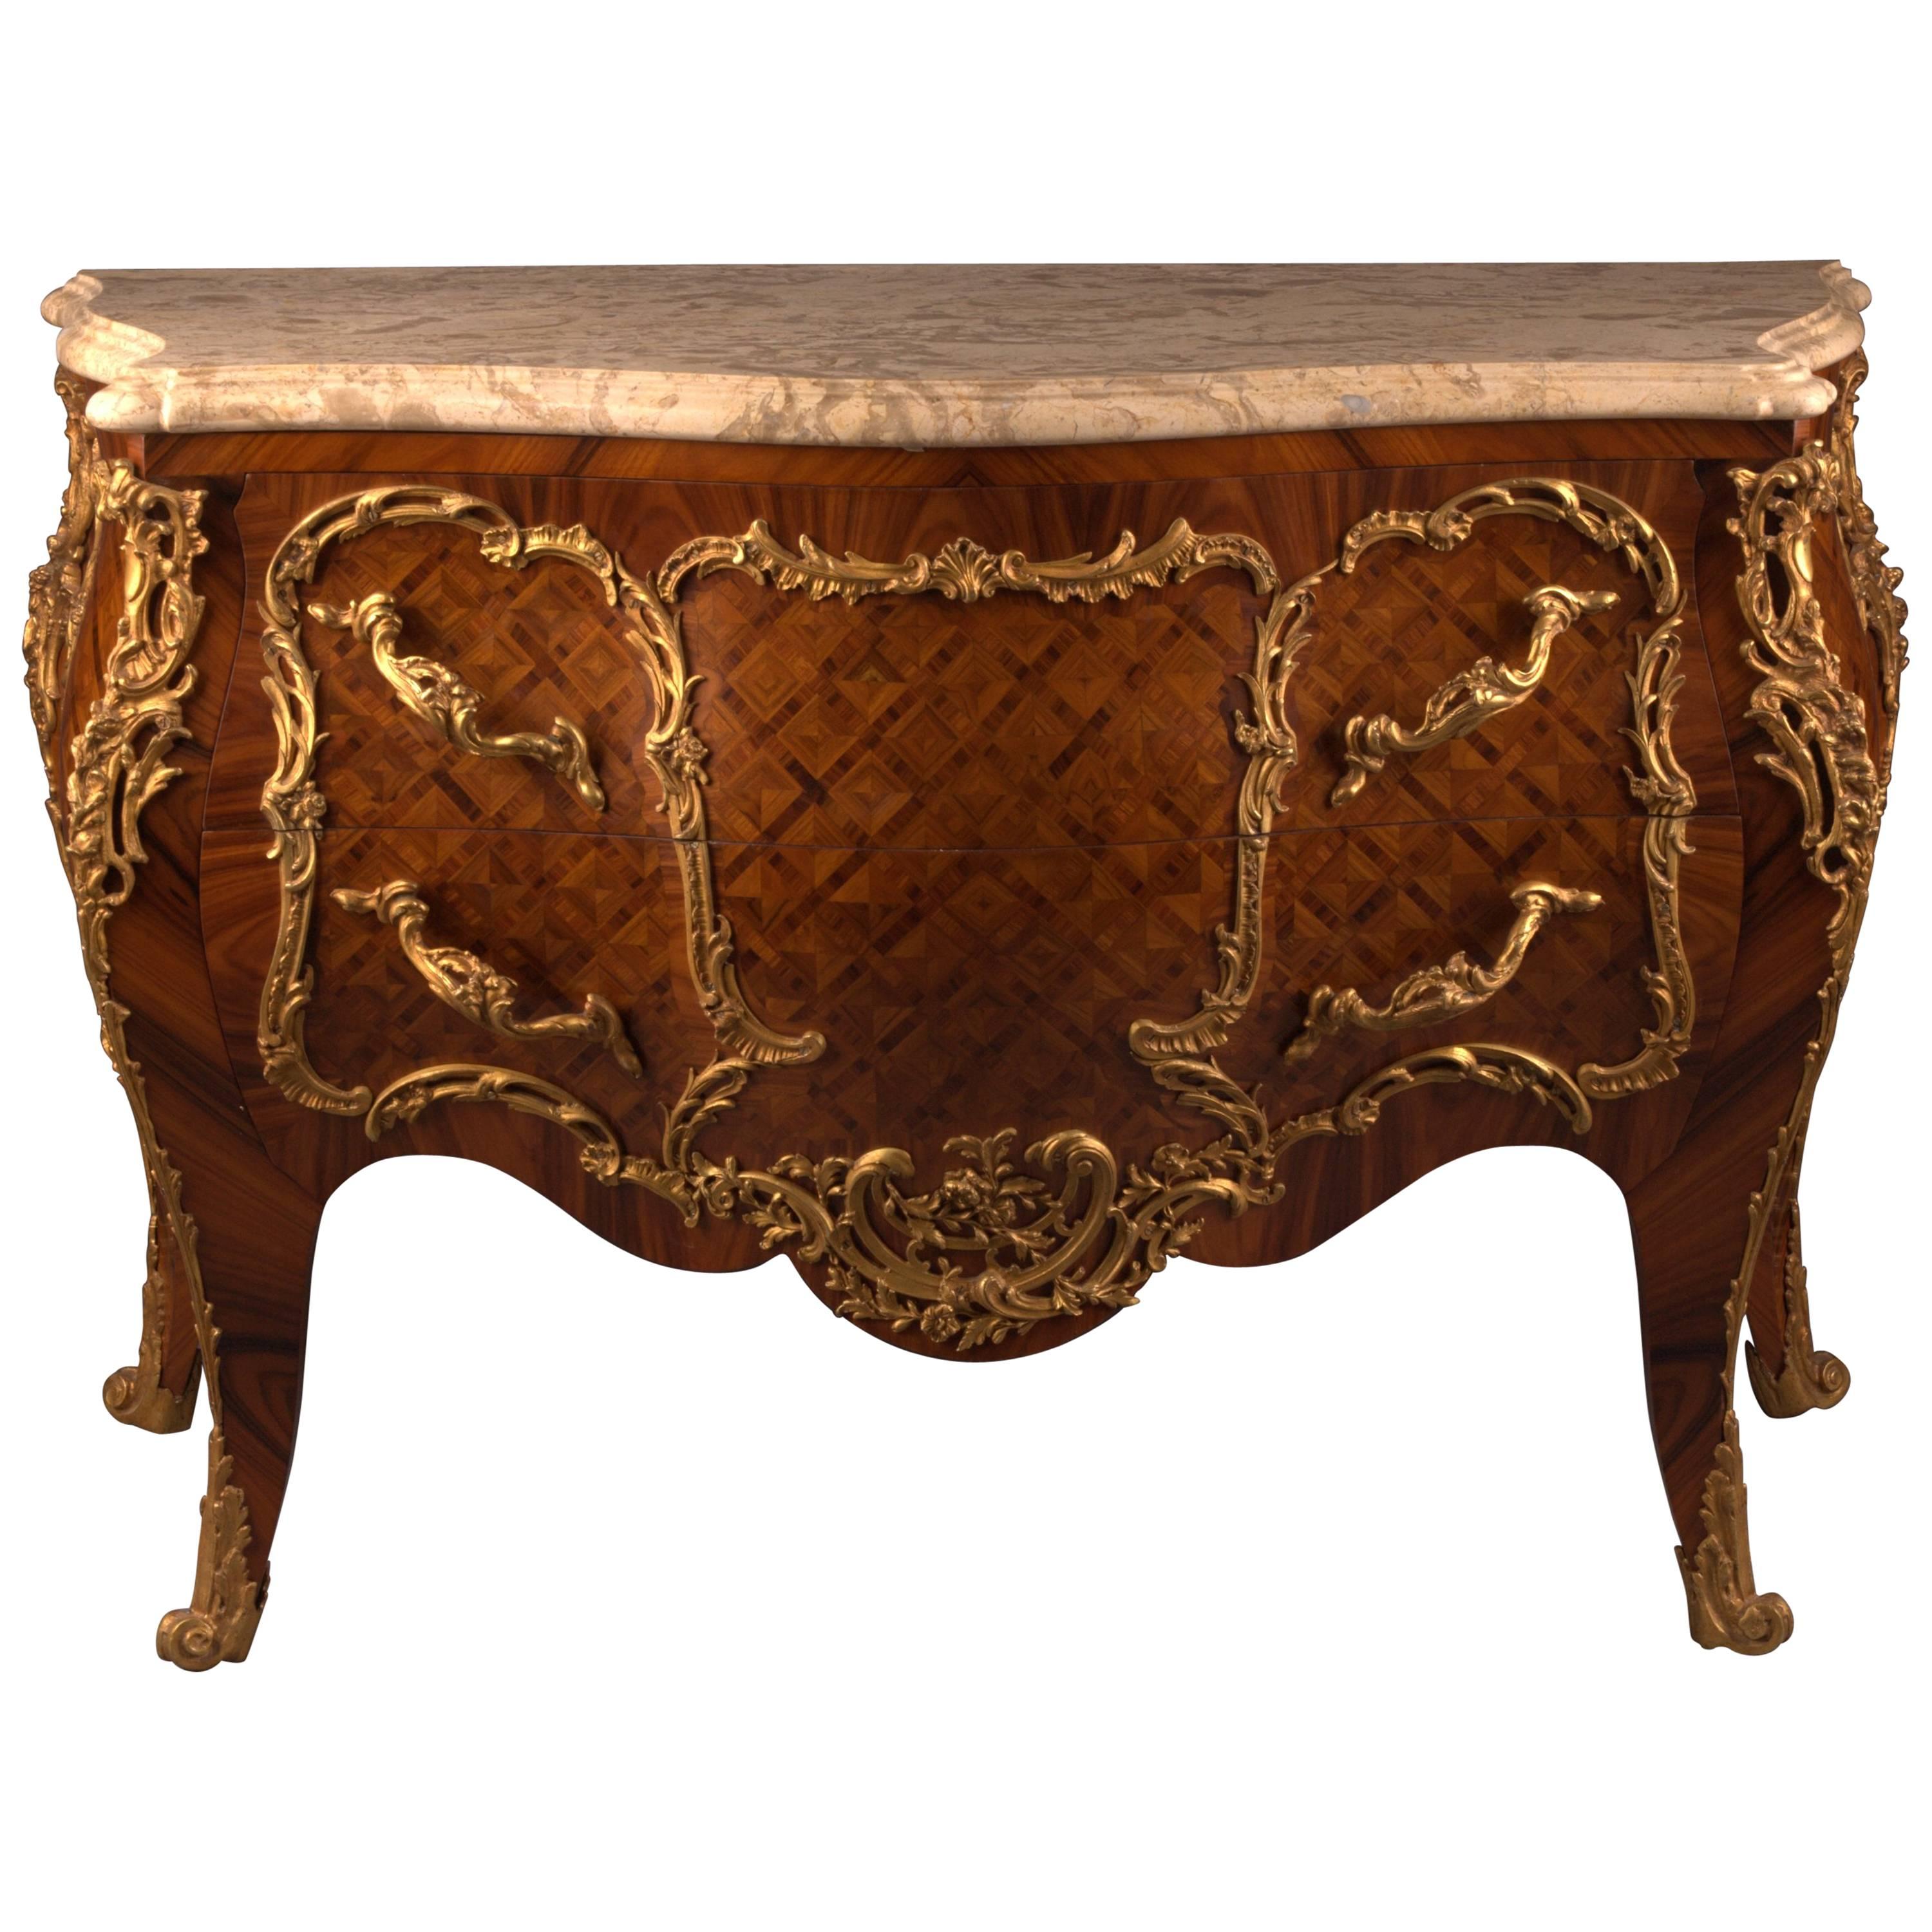 Castle Quality French Commode in Louis XV Style